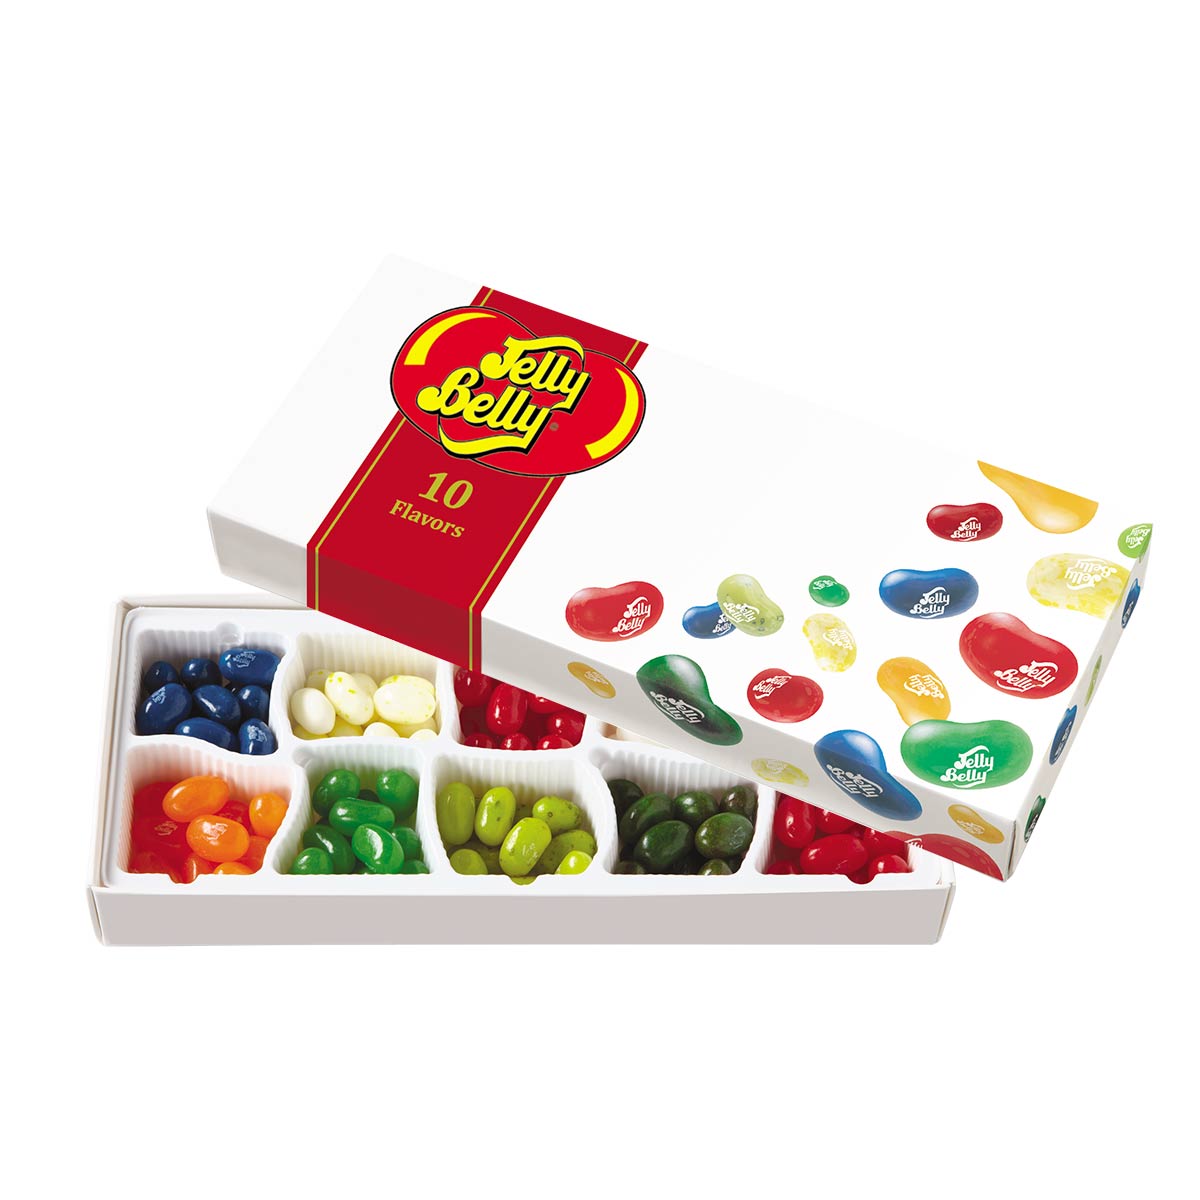 Jelly Belly 10-Flavor Gift Box. Assorted flavors like Buttered Popcorn; Very Cherry and more. Great present for candy fans.